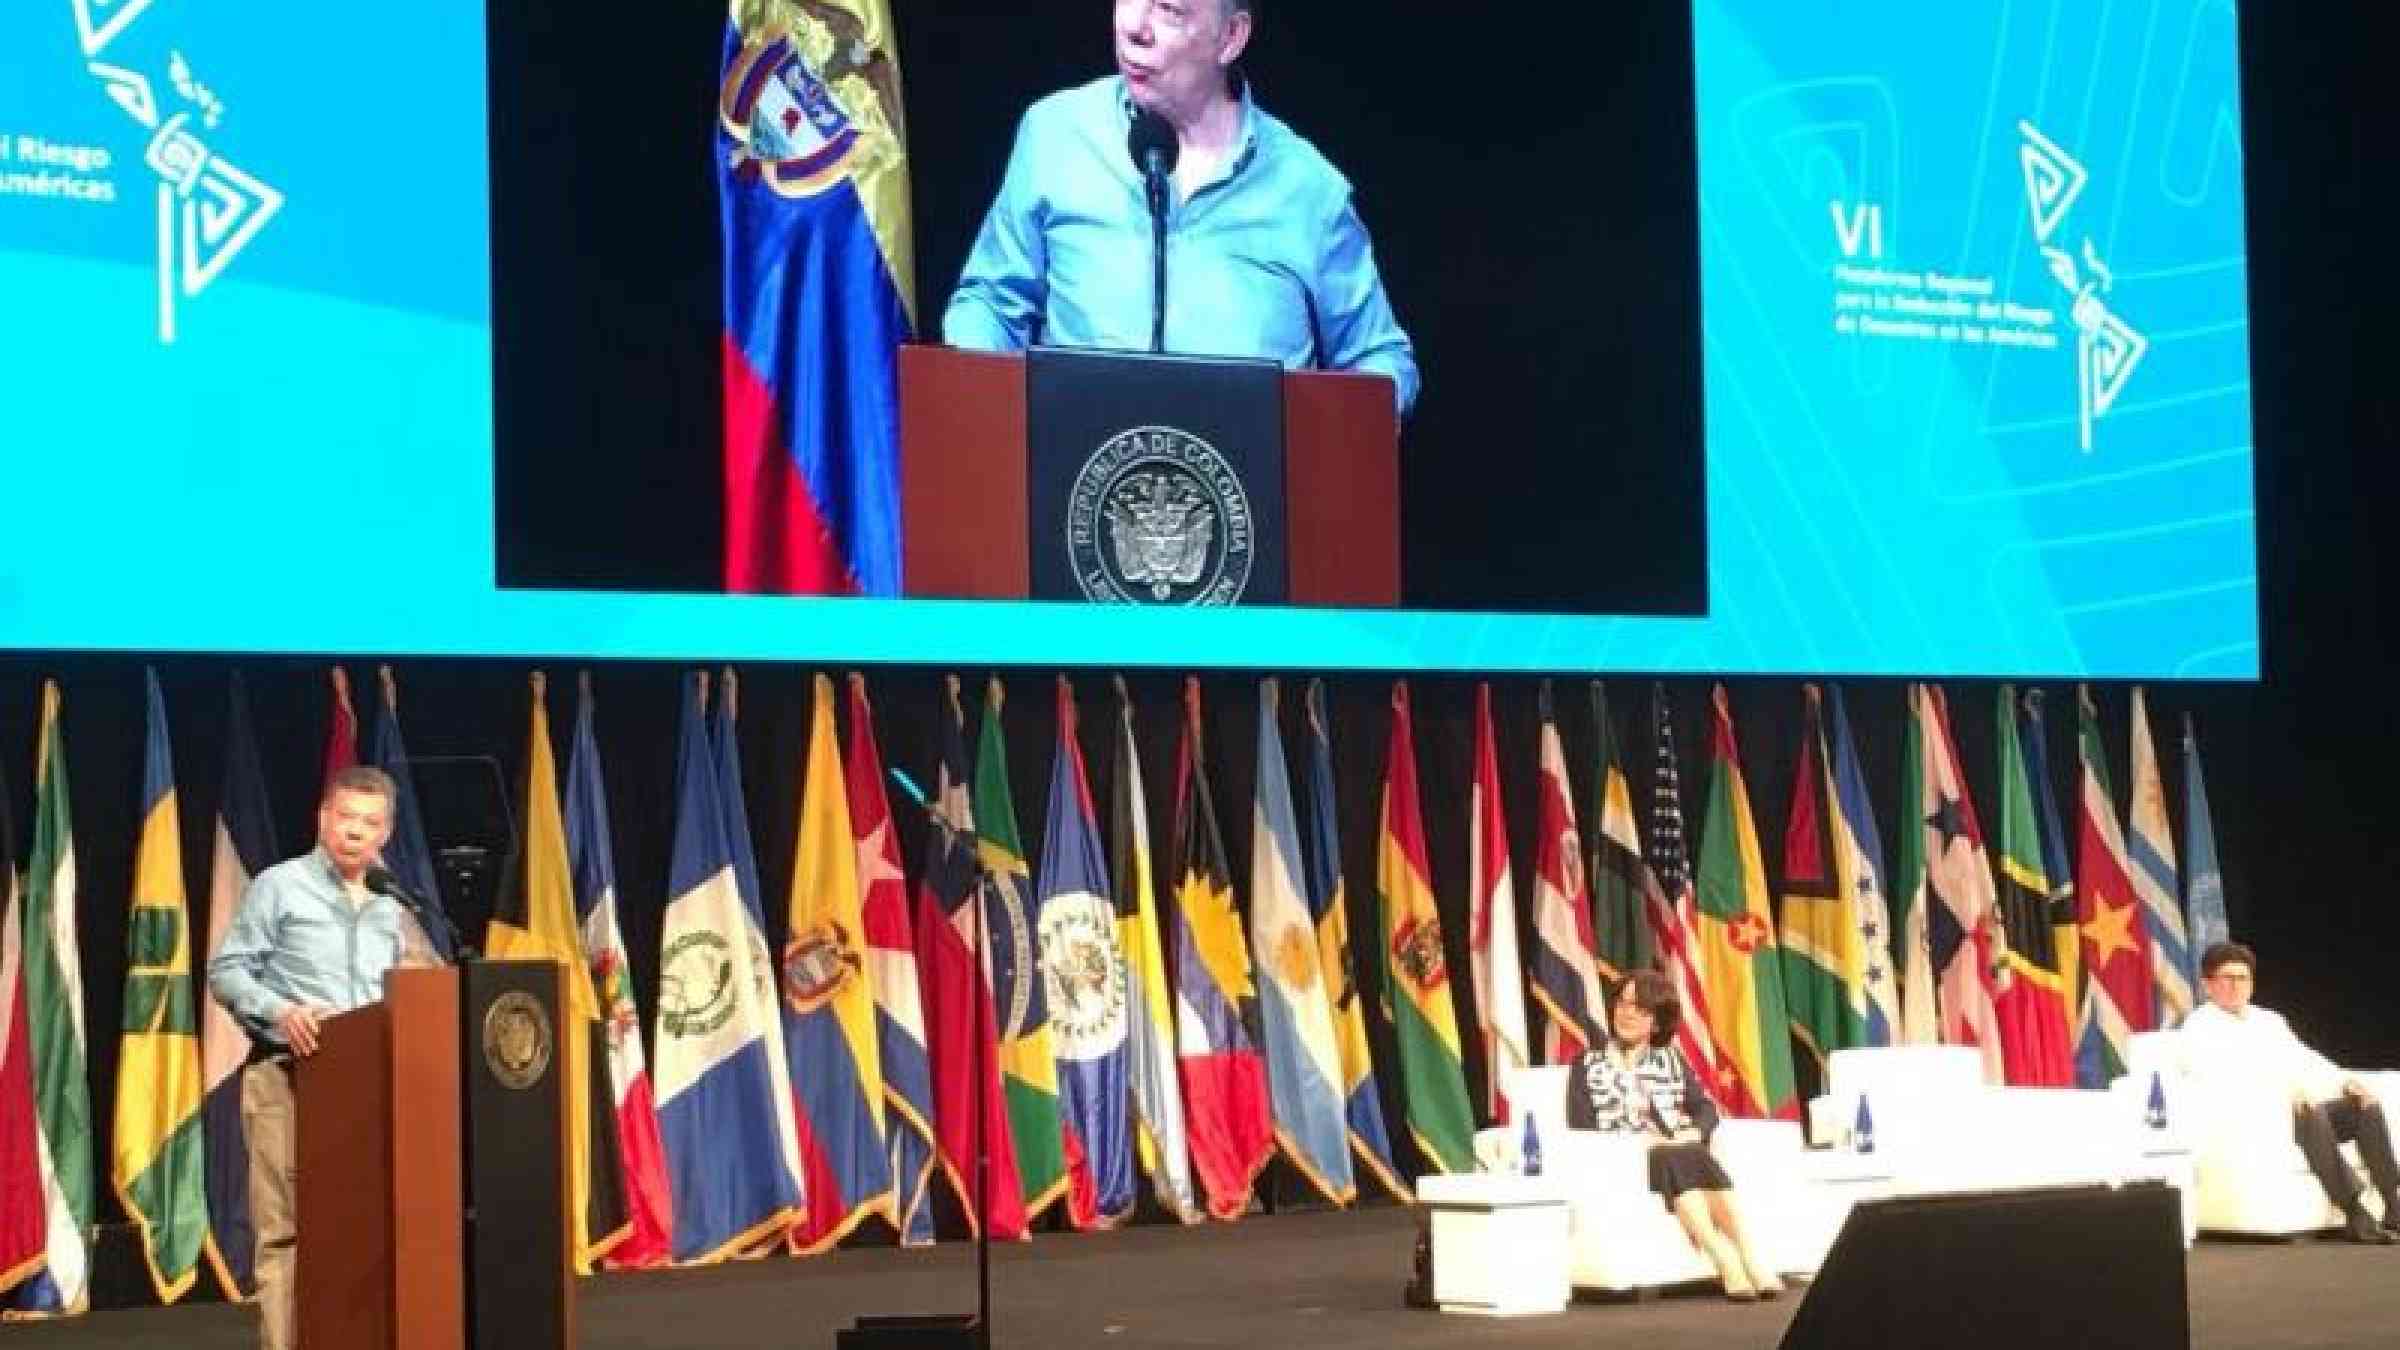 President of Colombia, Juan Manuel Santos, addressing the 6th Regional Platform on Disaster Risk Reduction in the Americas